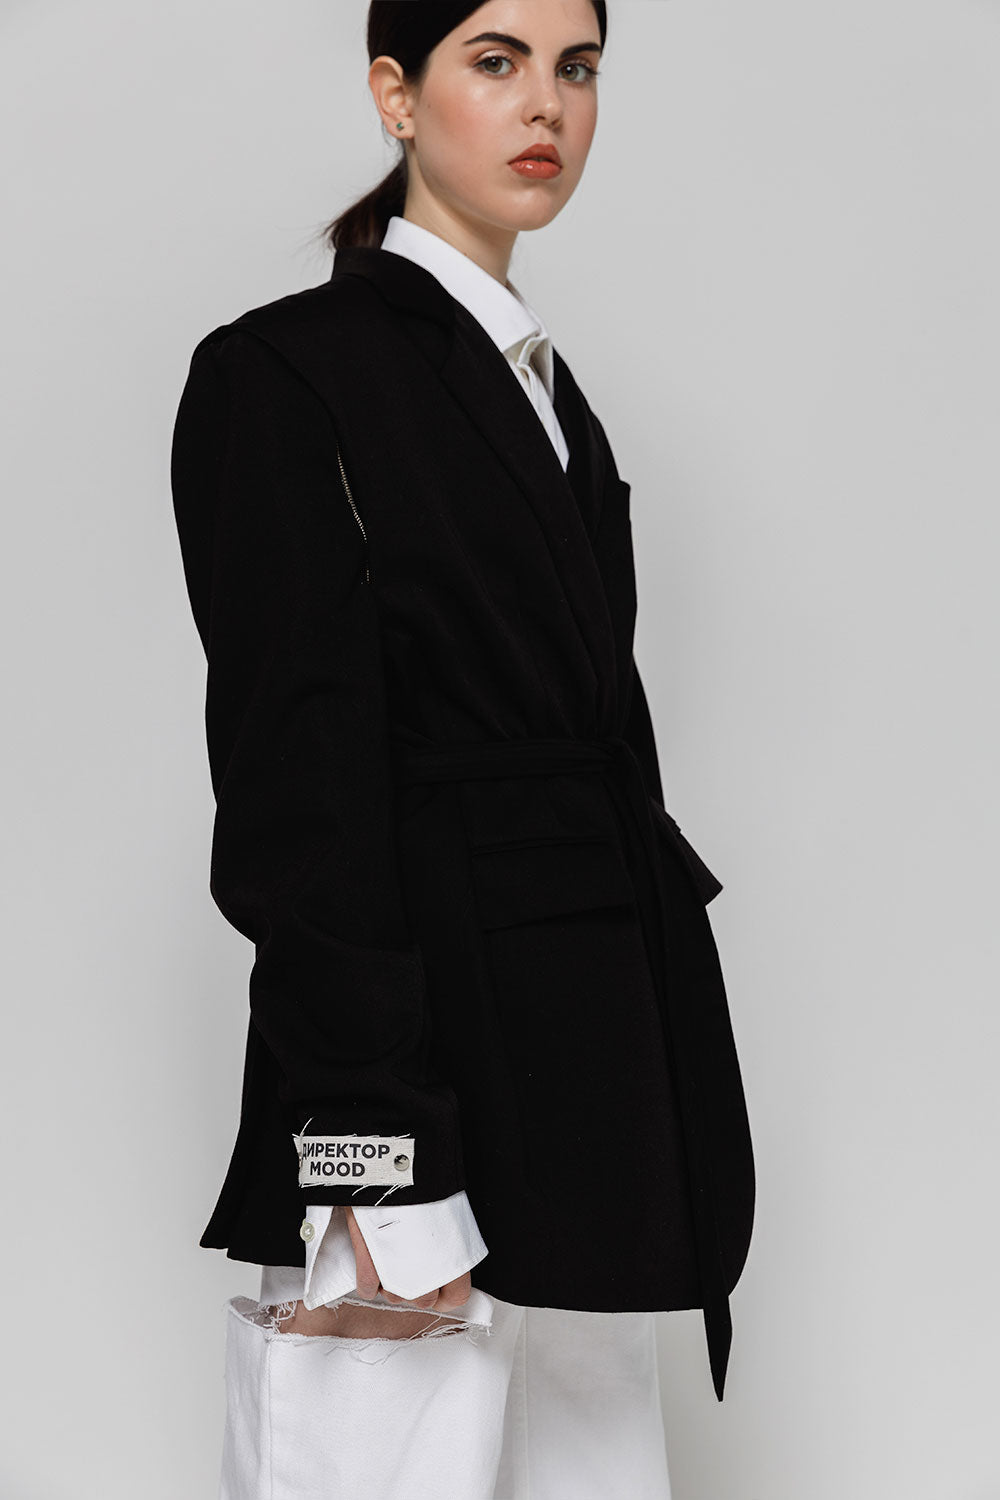 Crepe jacket-constructor in classical black side view